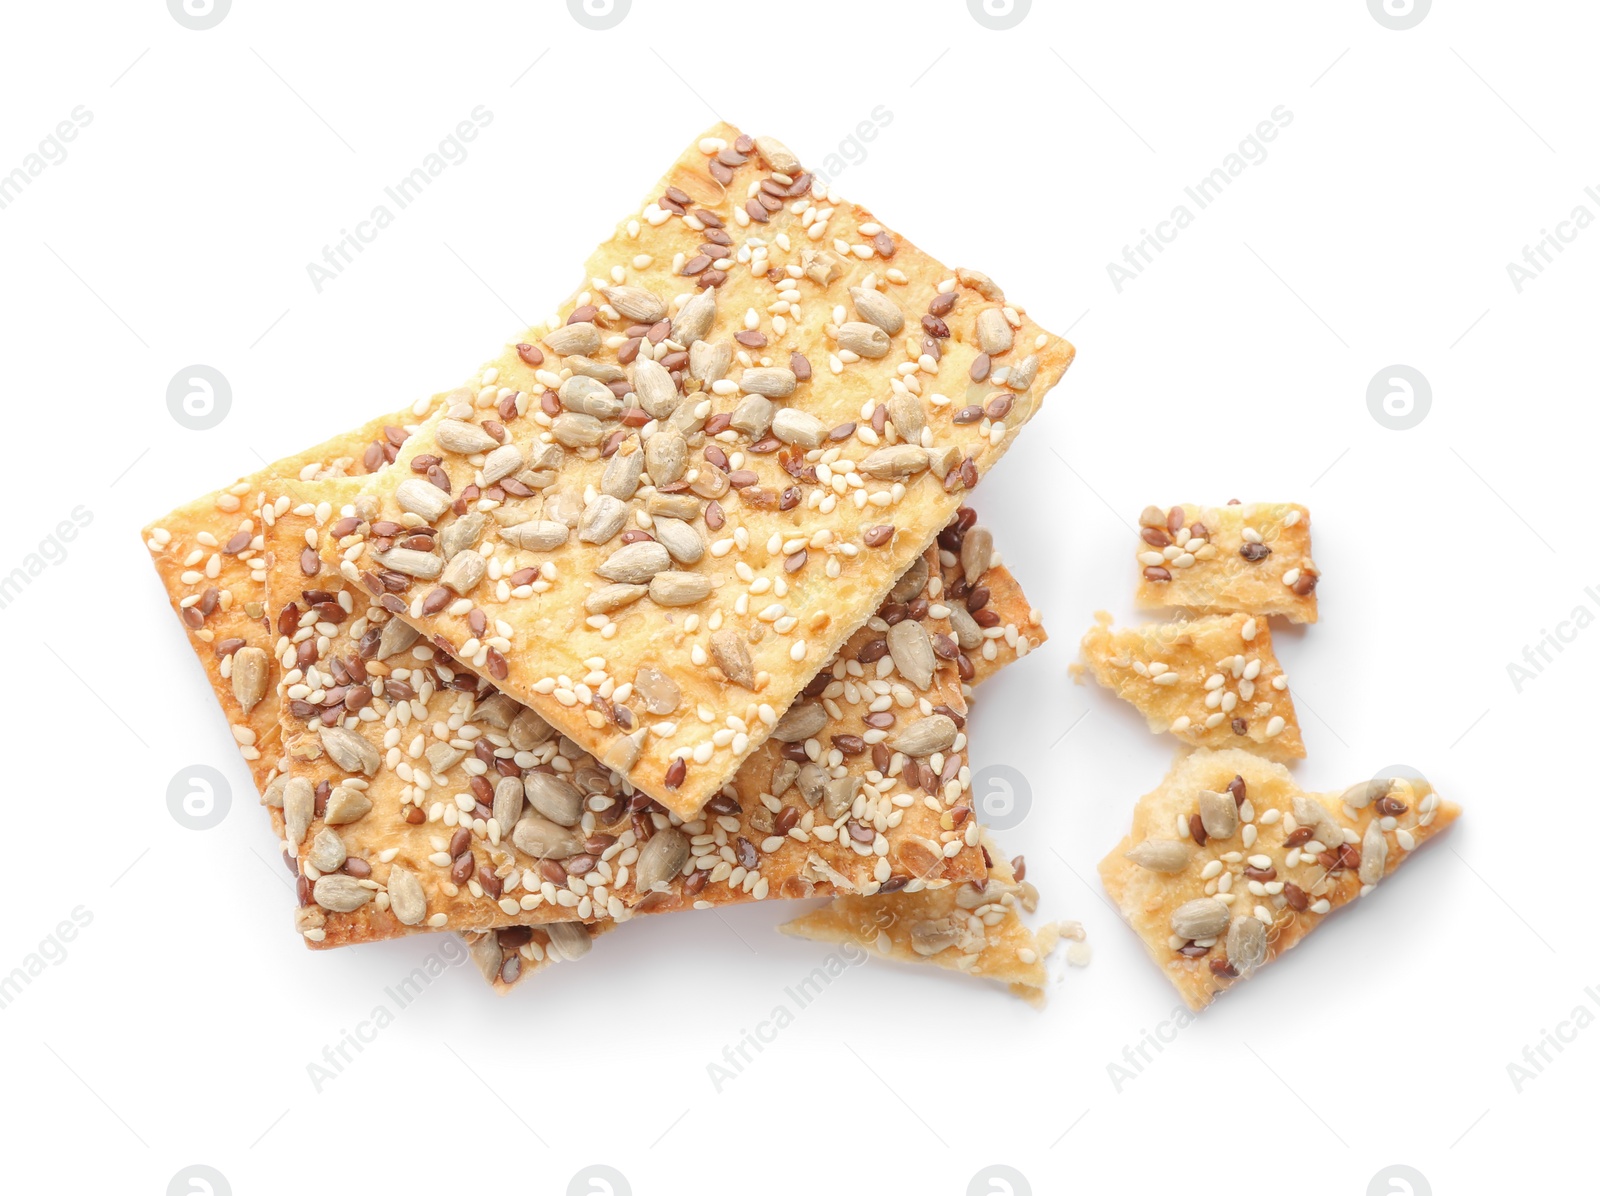 Photo of Broken crispy crackers with different seeds isolated on white